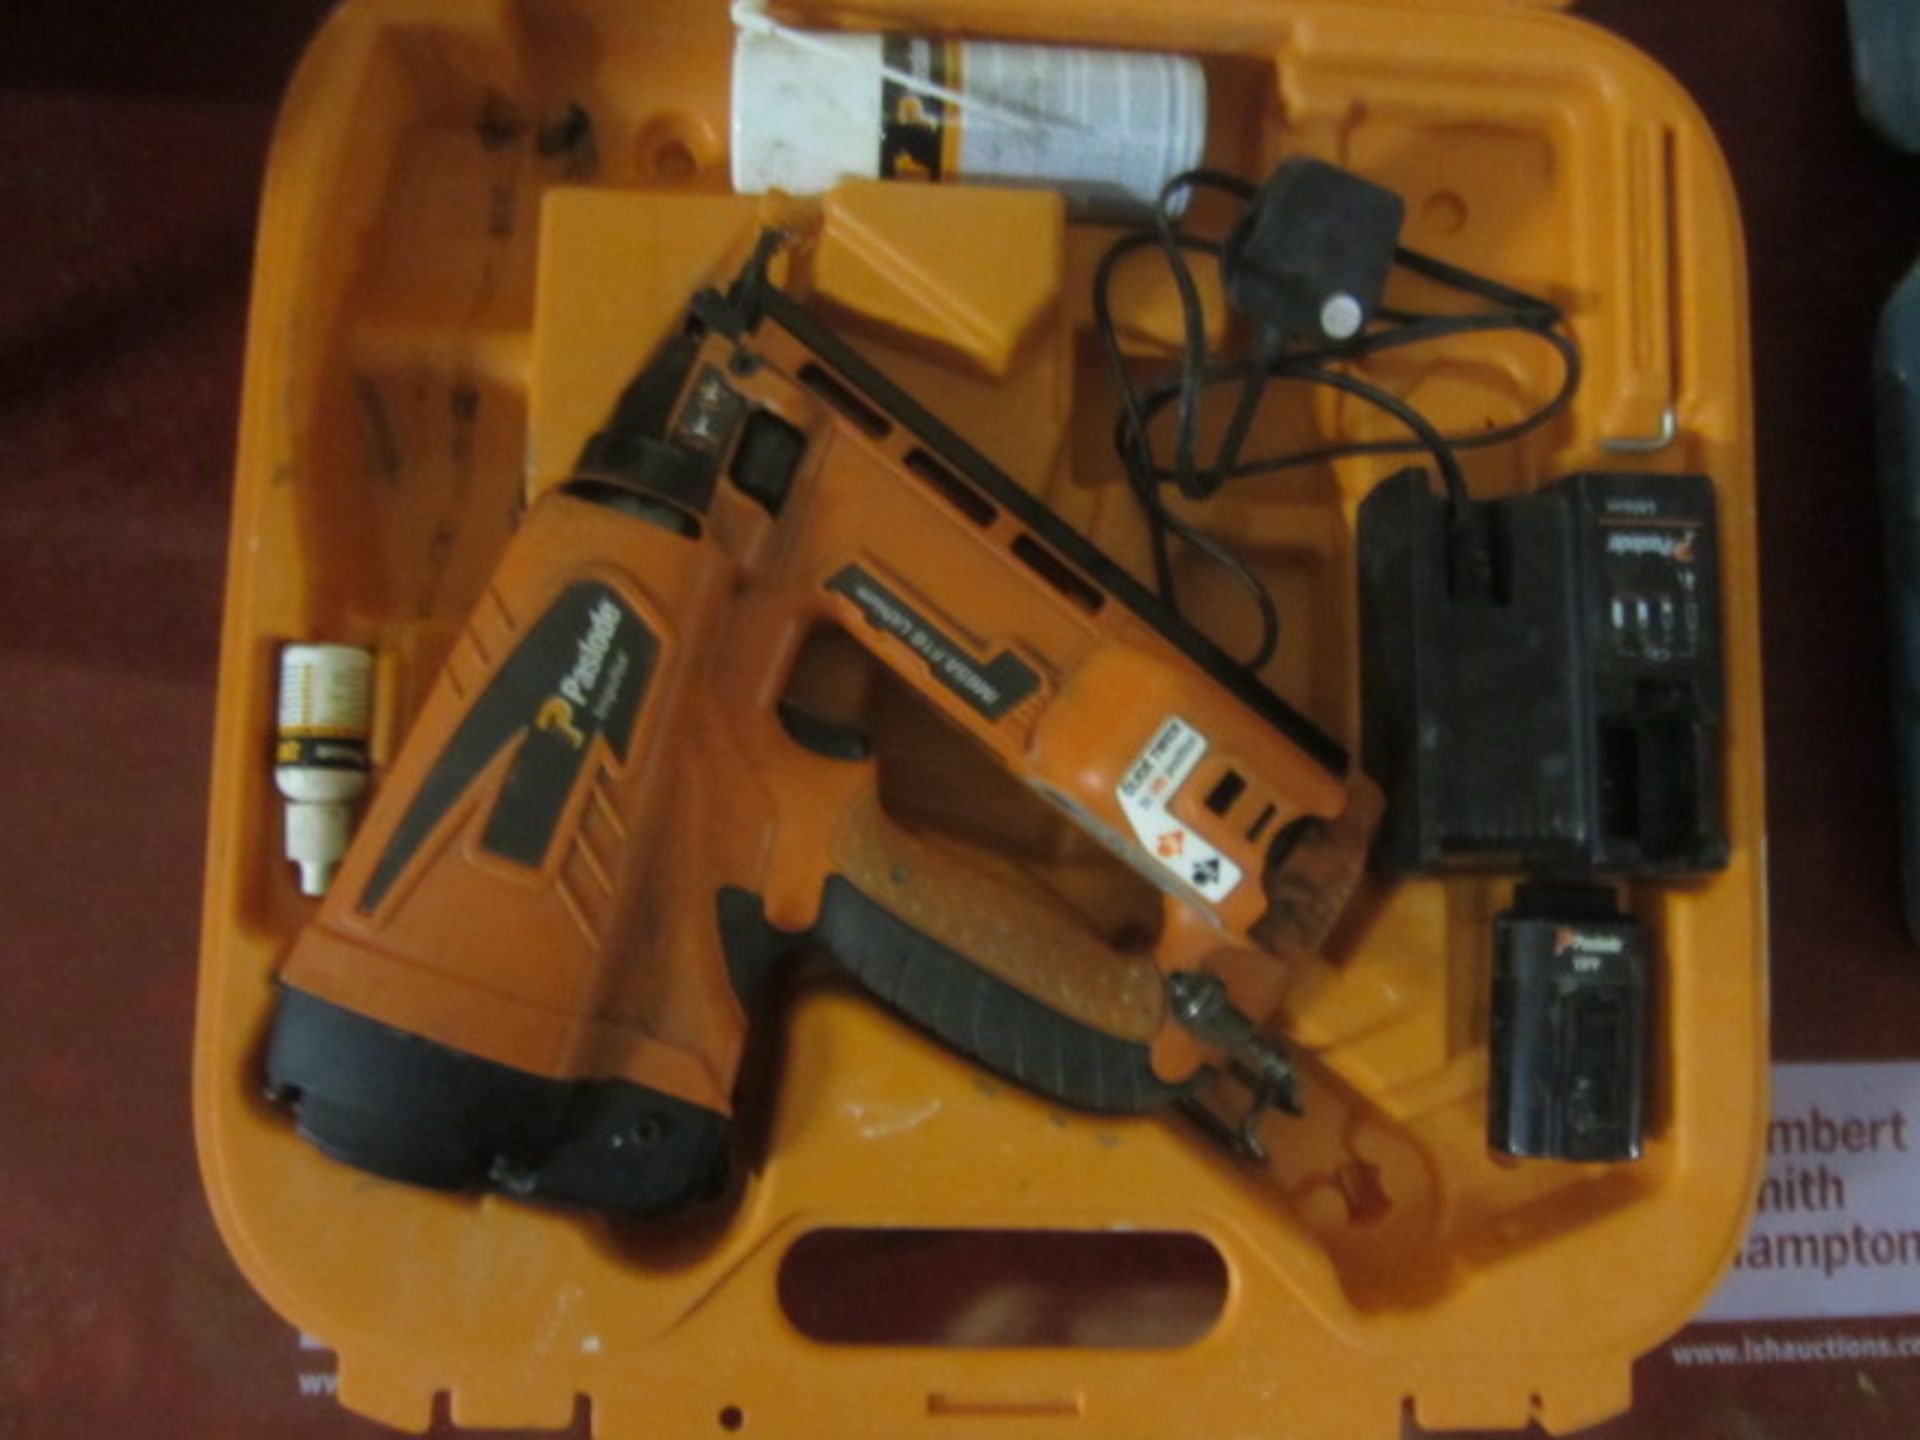 Paslode IM65A-F16 cordless second fix nail gun, 1 x charger, 1 x battery ** Located: Stoneford Farm,